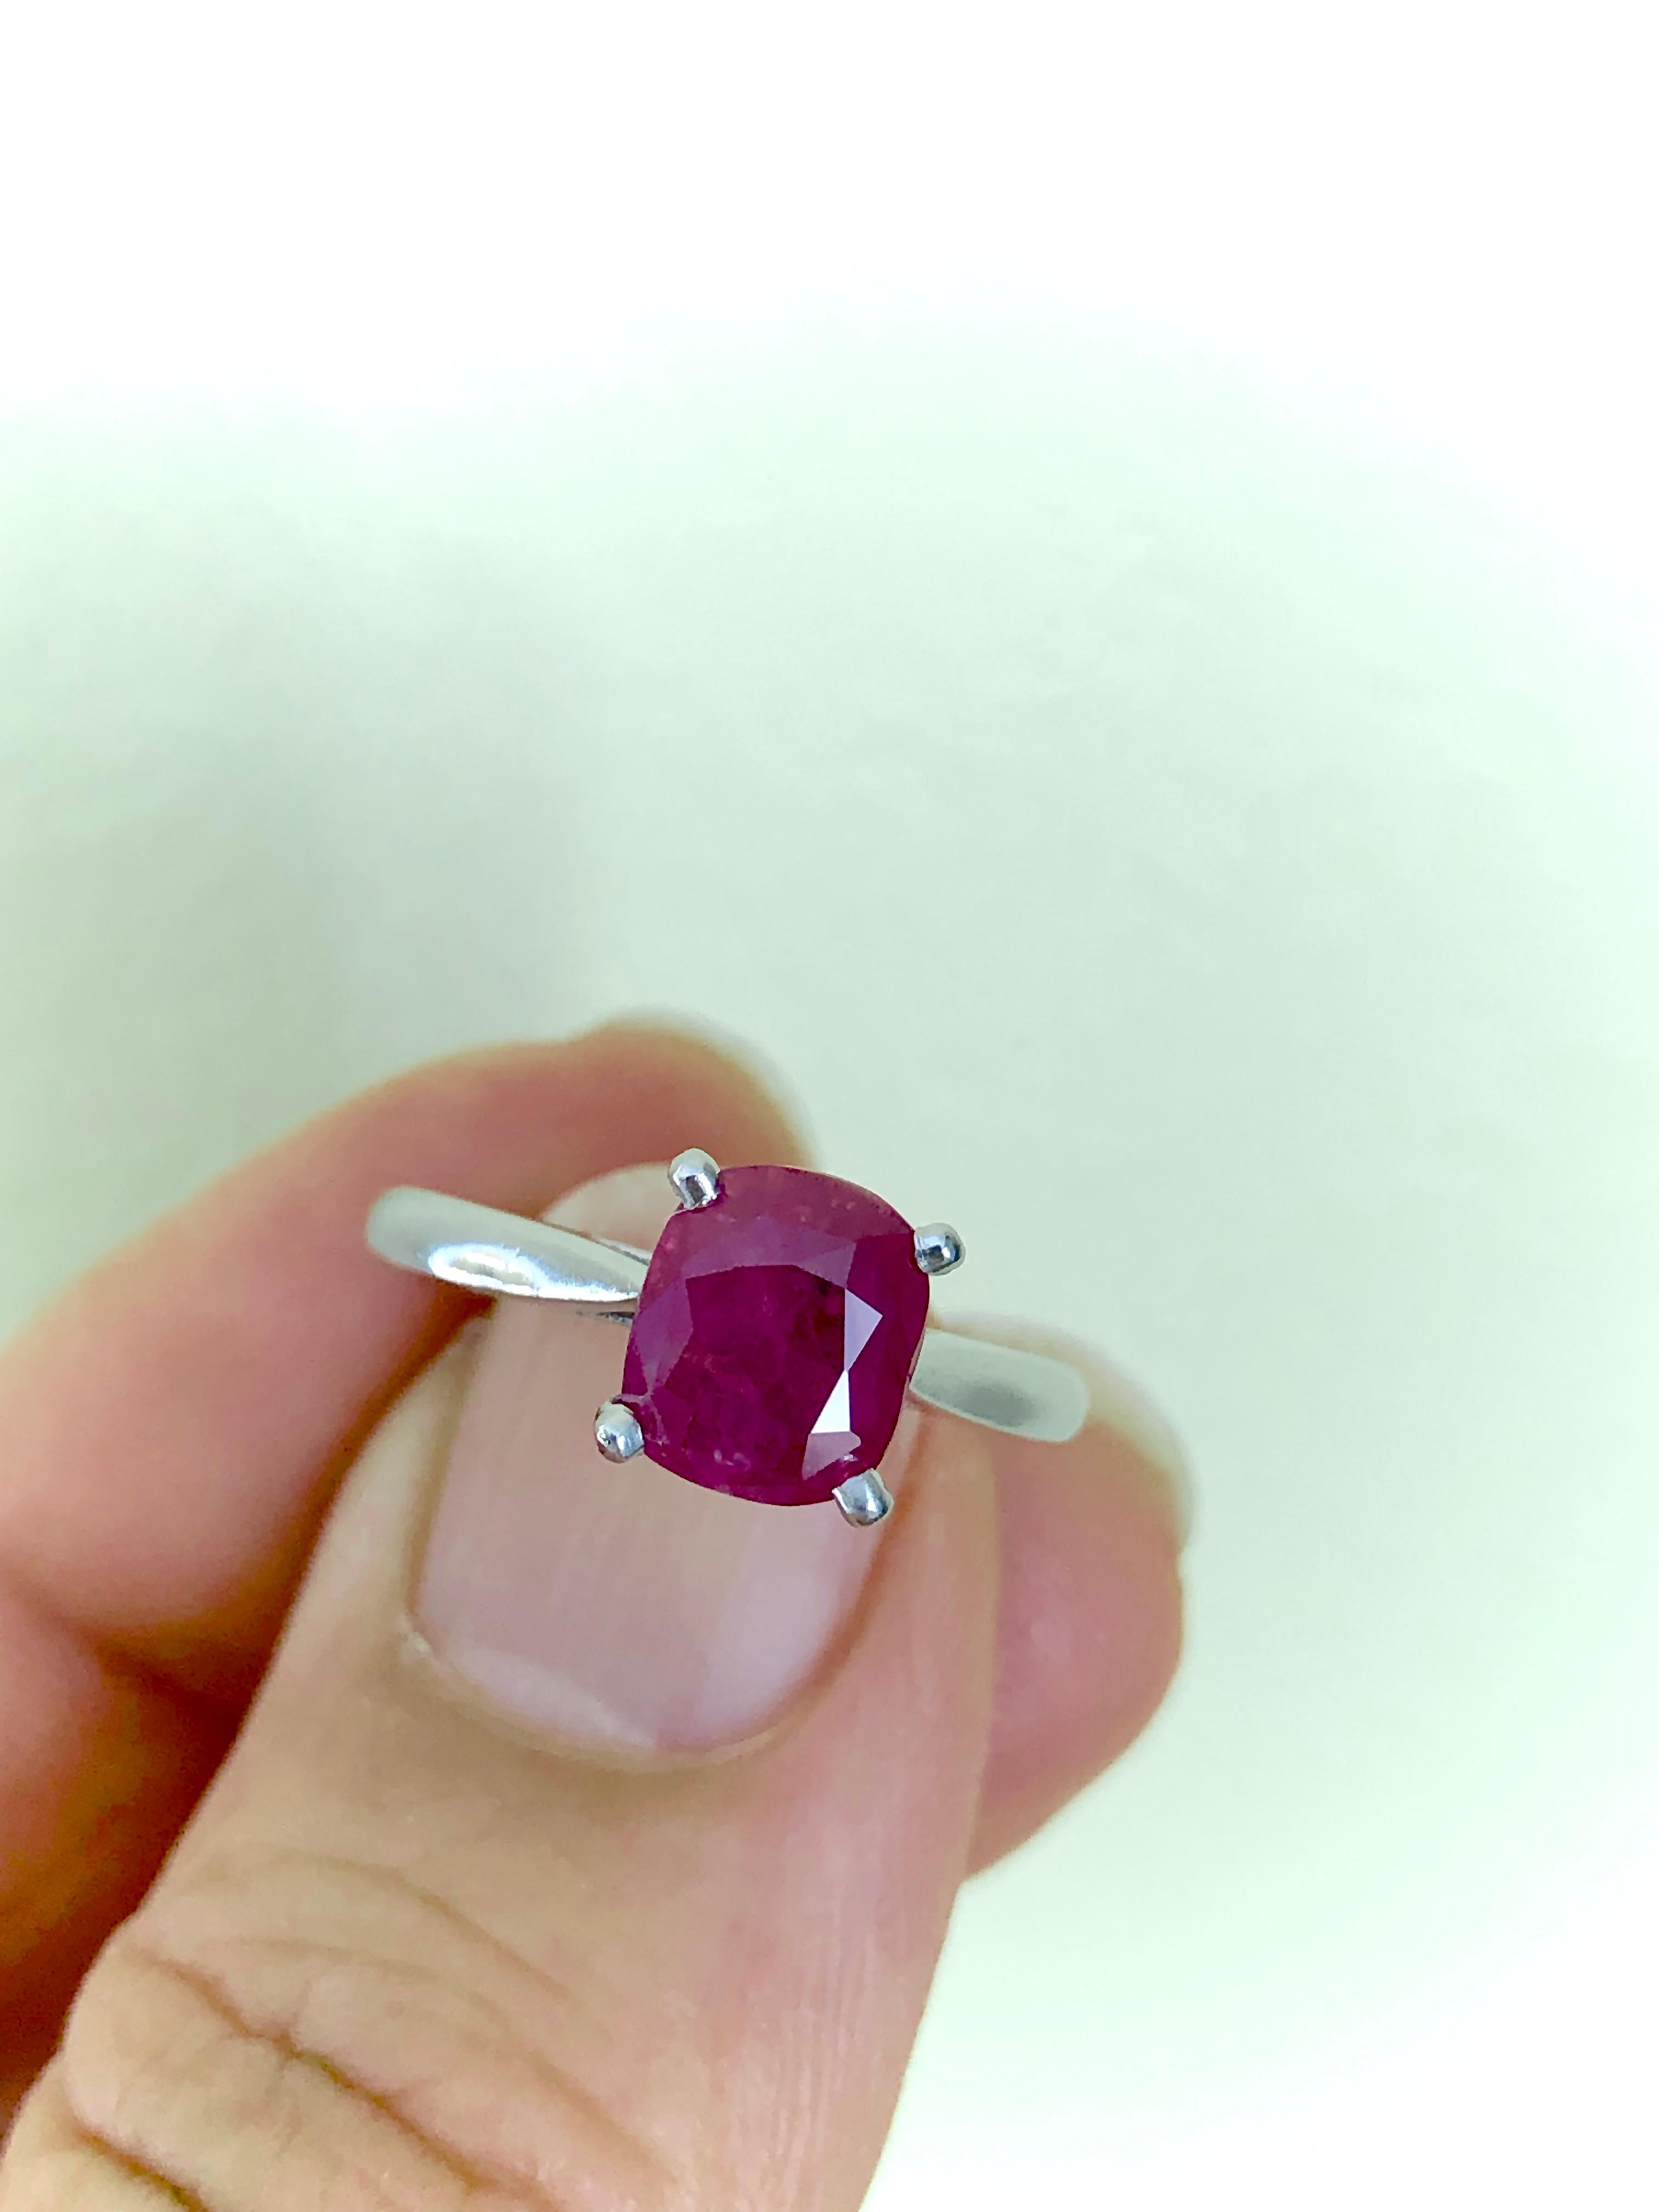 A classic natural ruby engagement ring estate. Set with one cushion-shaped old cut natural untreated ruby in a prong setting open back with a weight of 2.48 carats. A classic solitaire design 950 platinum settings. Currently a US size 6:25 and